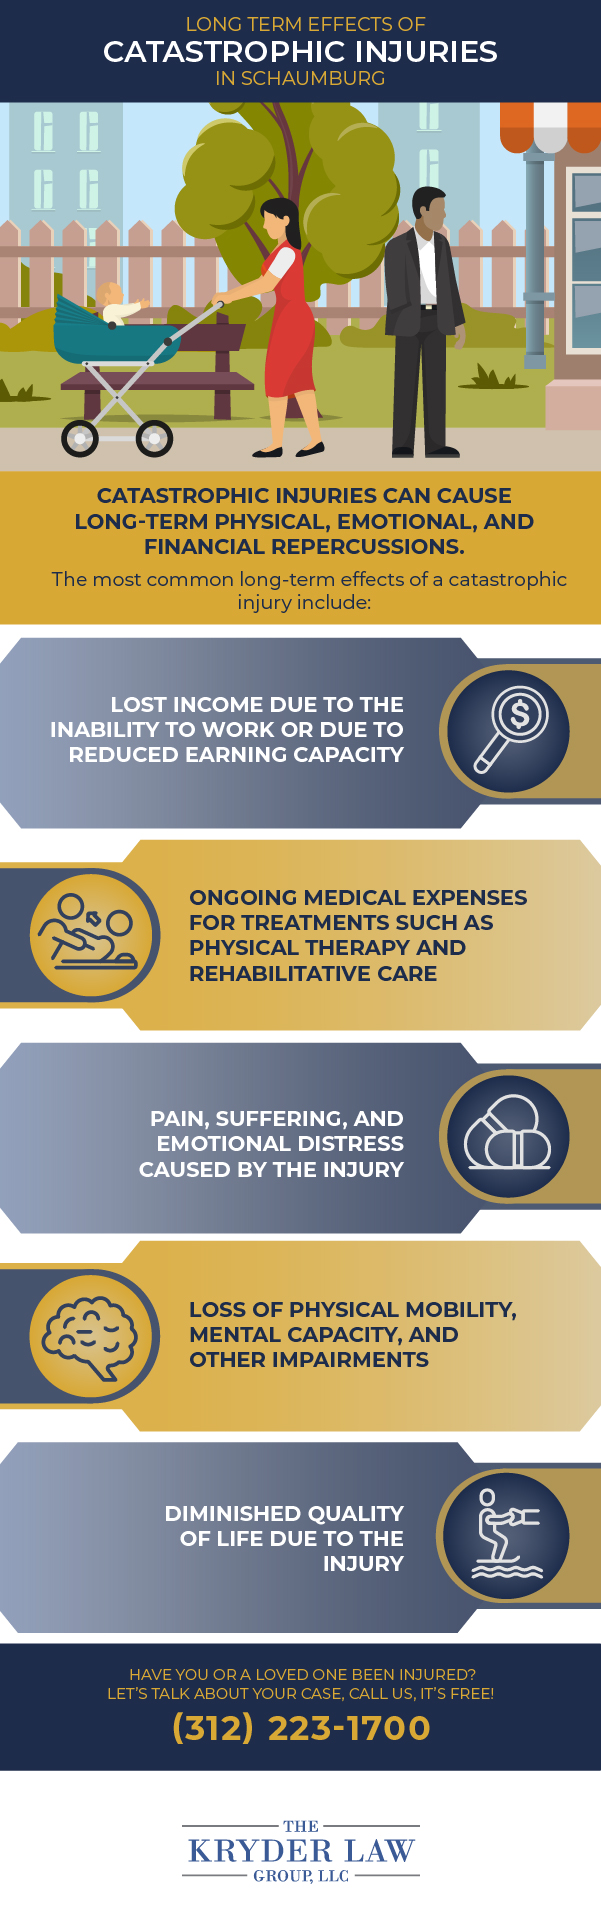 Long Term Effects of Catastrophic Injuries in Schaumburg Infographic